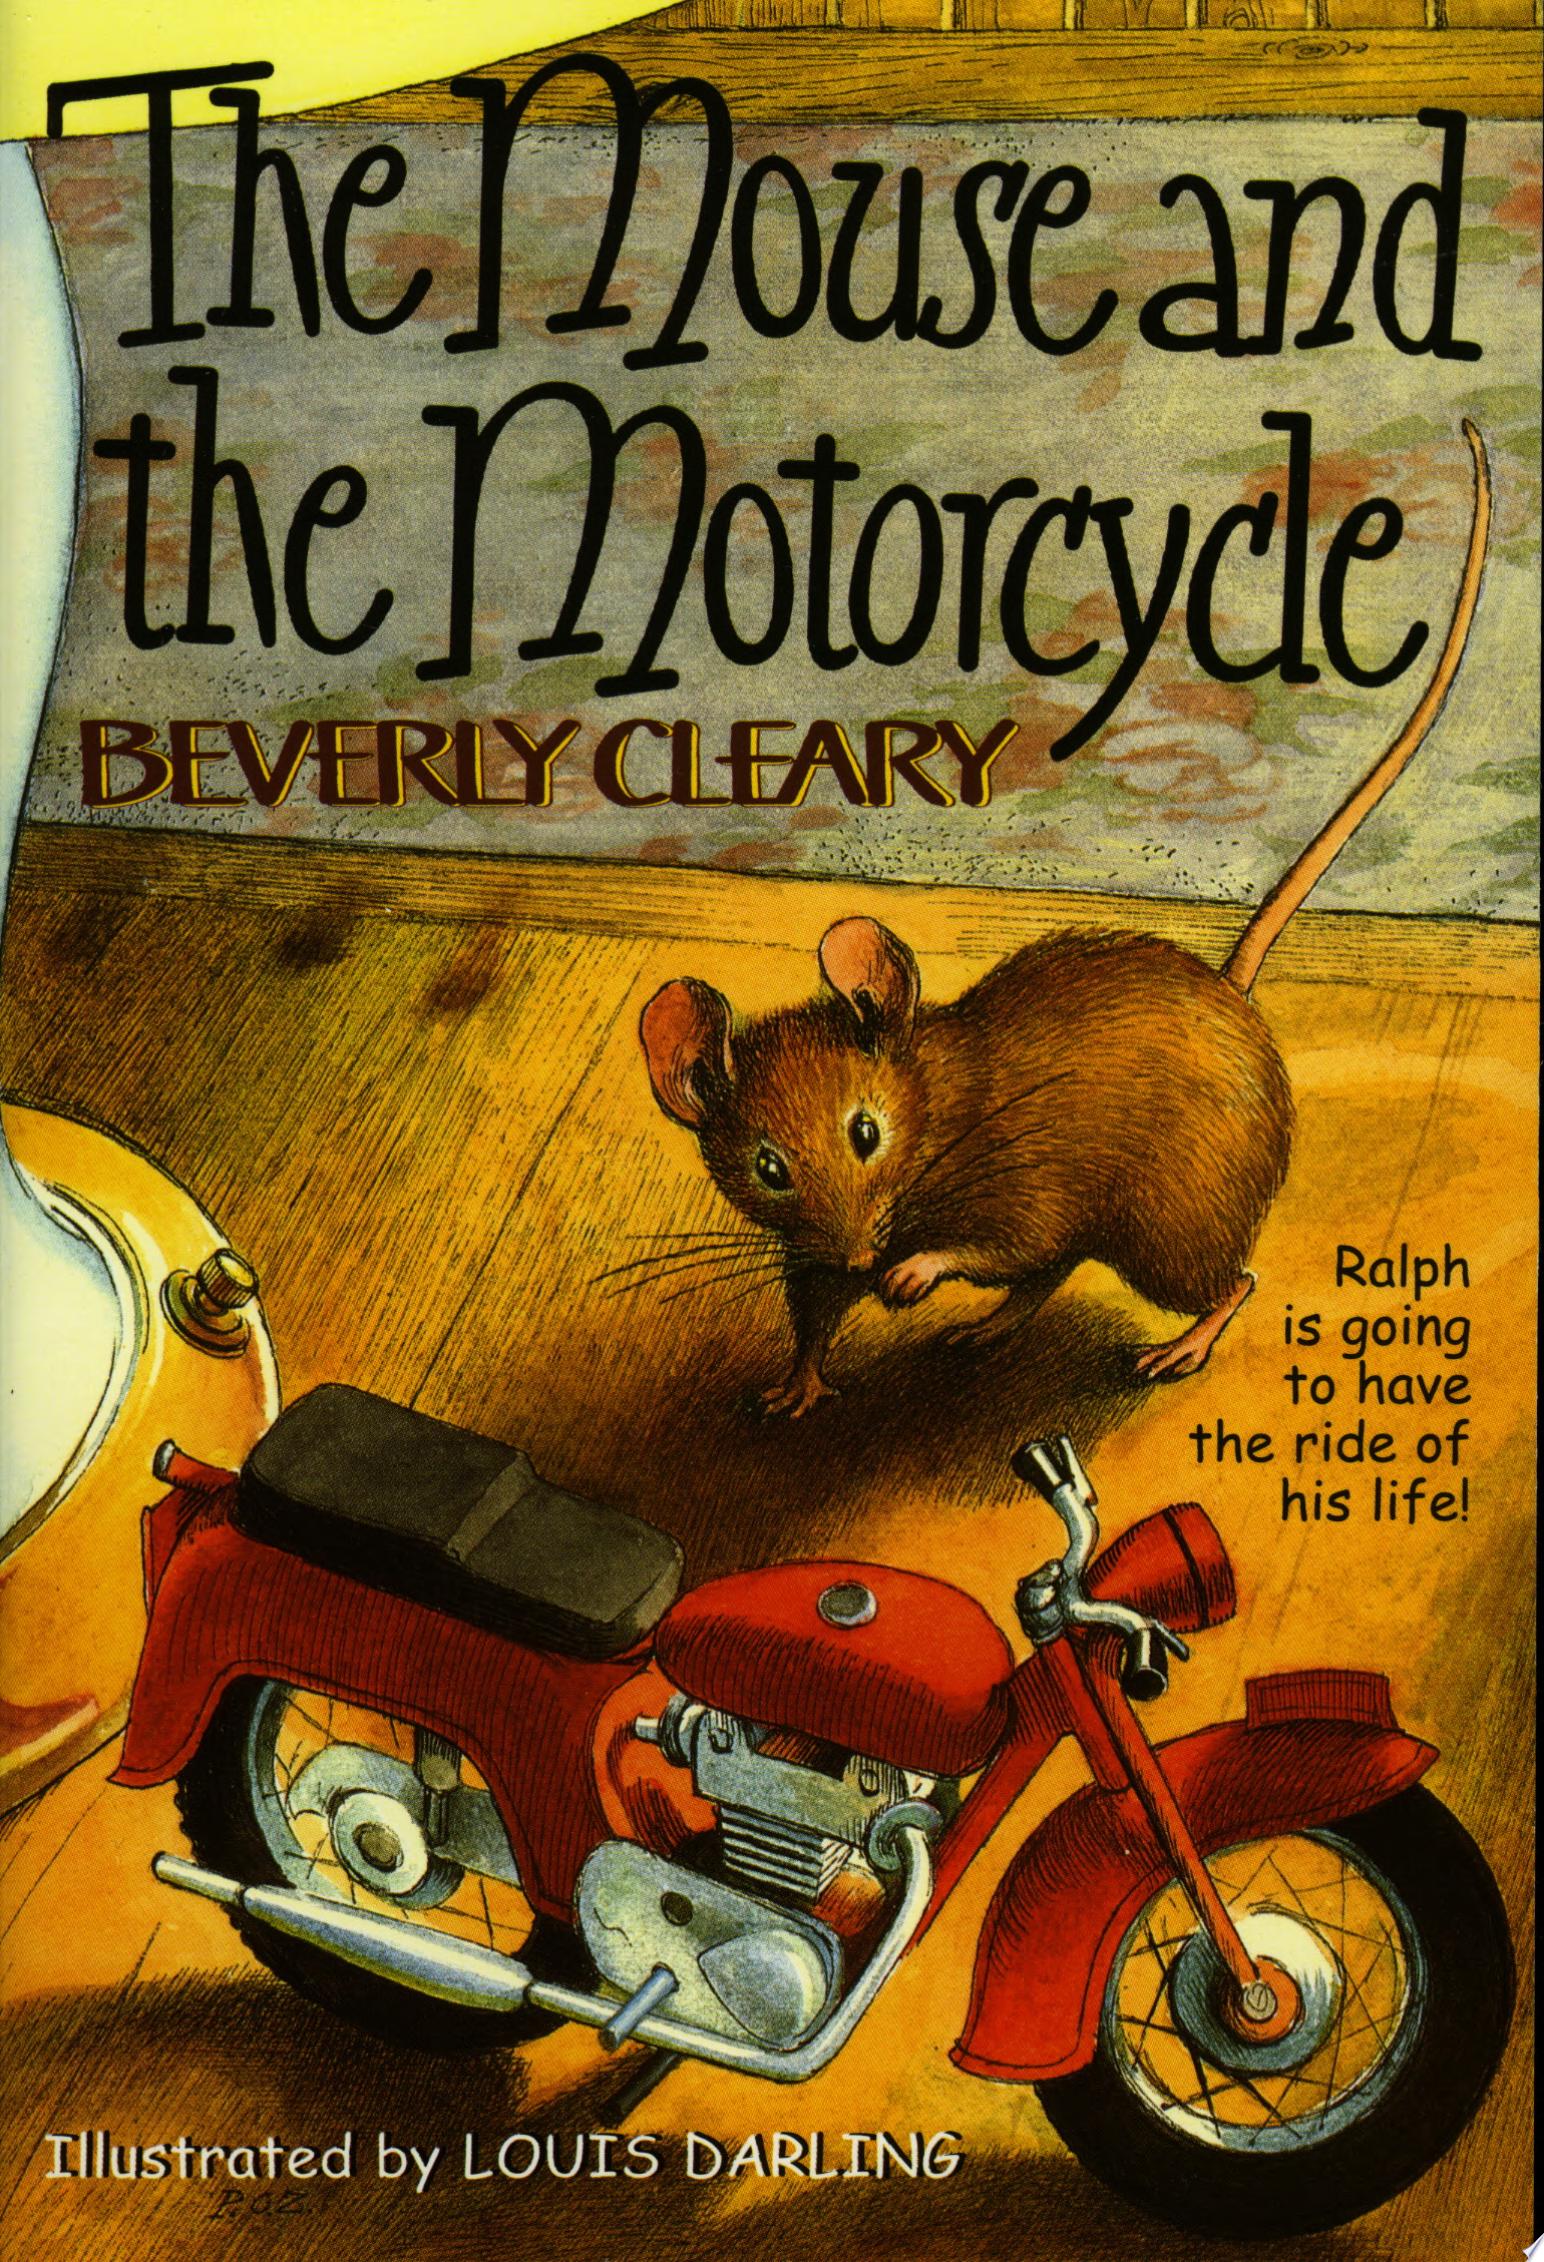 Image for "The Mouse and the Motorcycle"